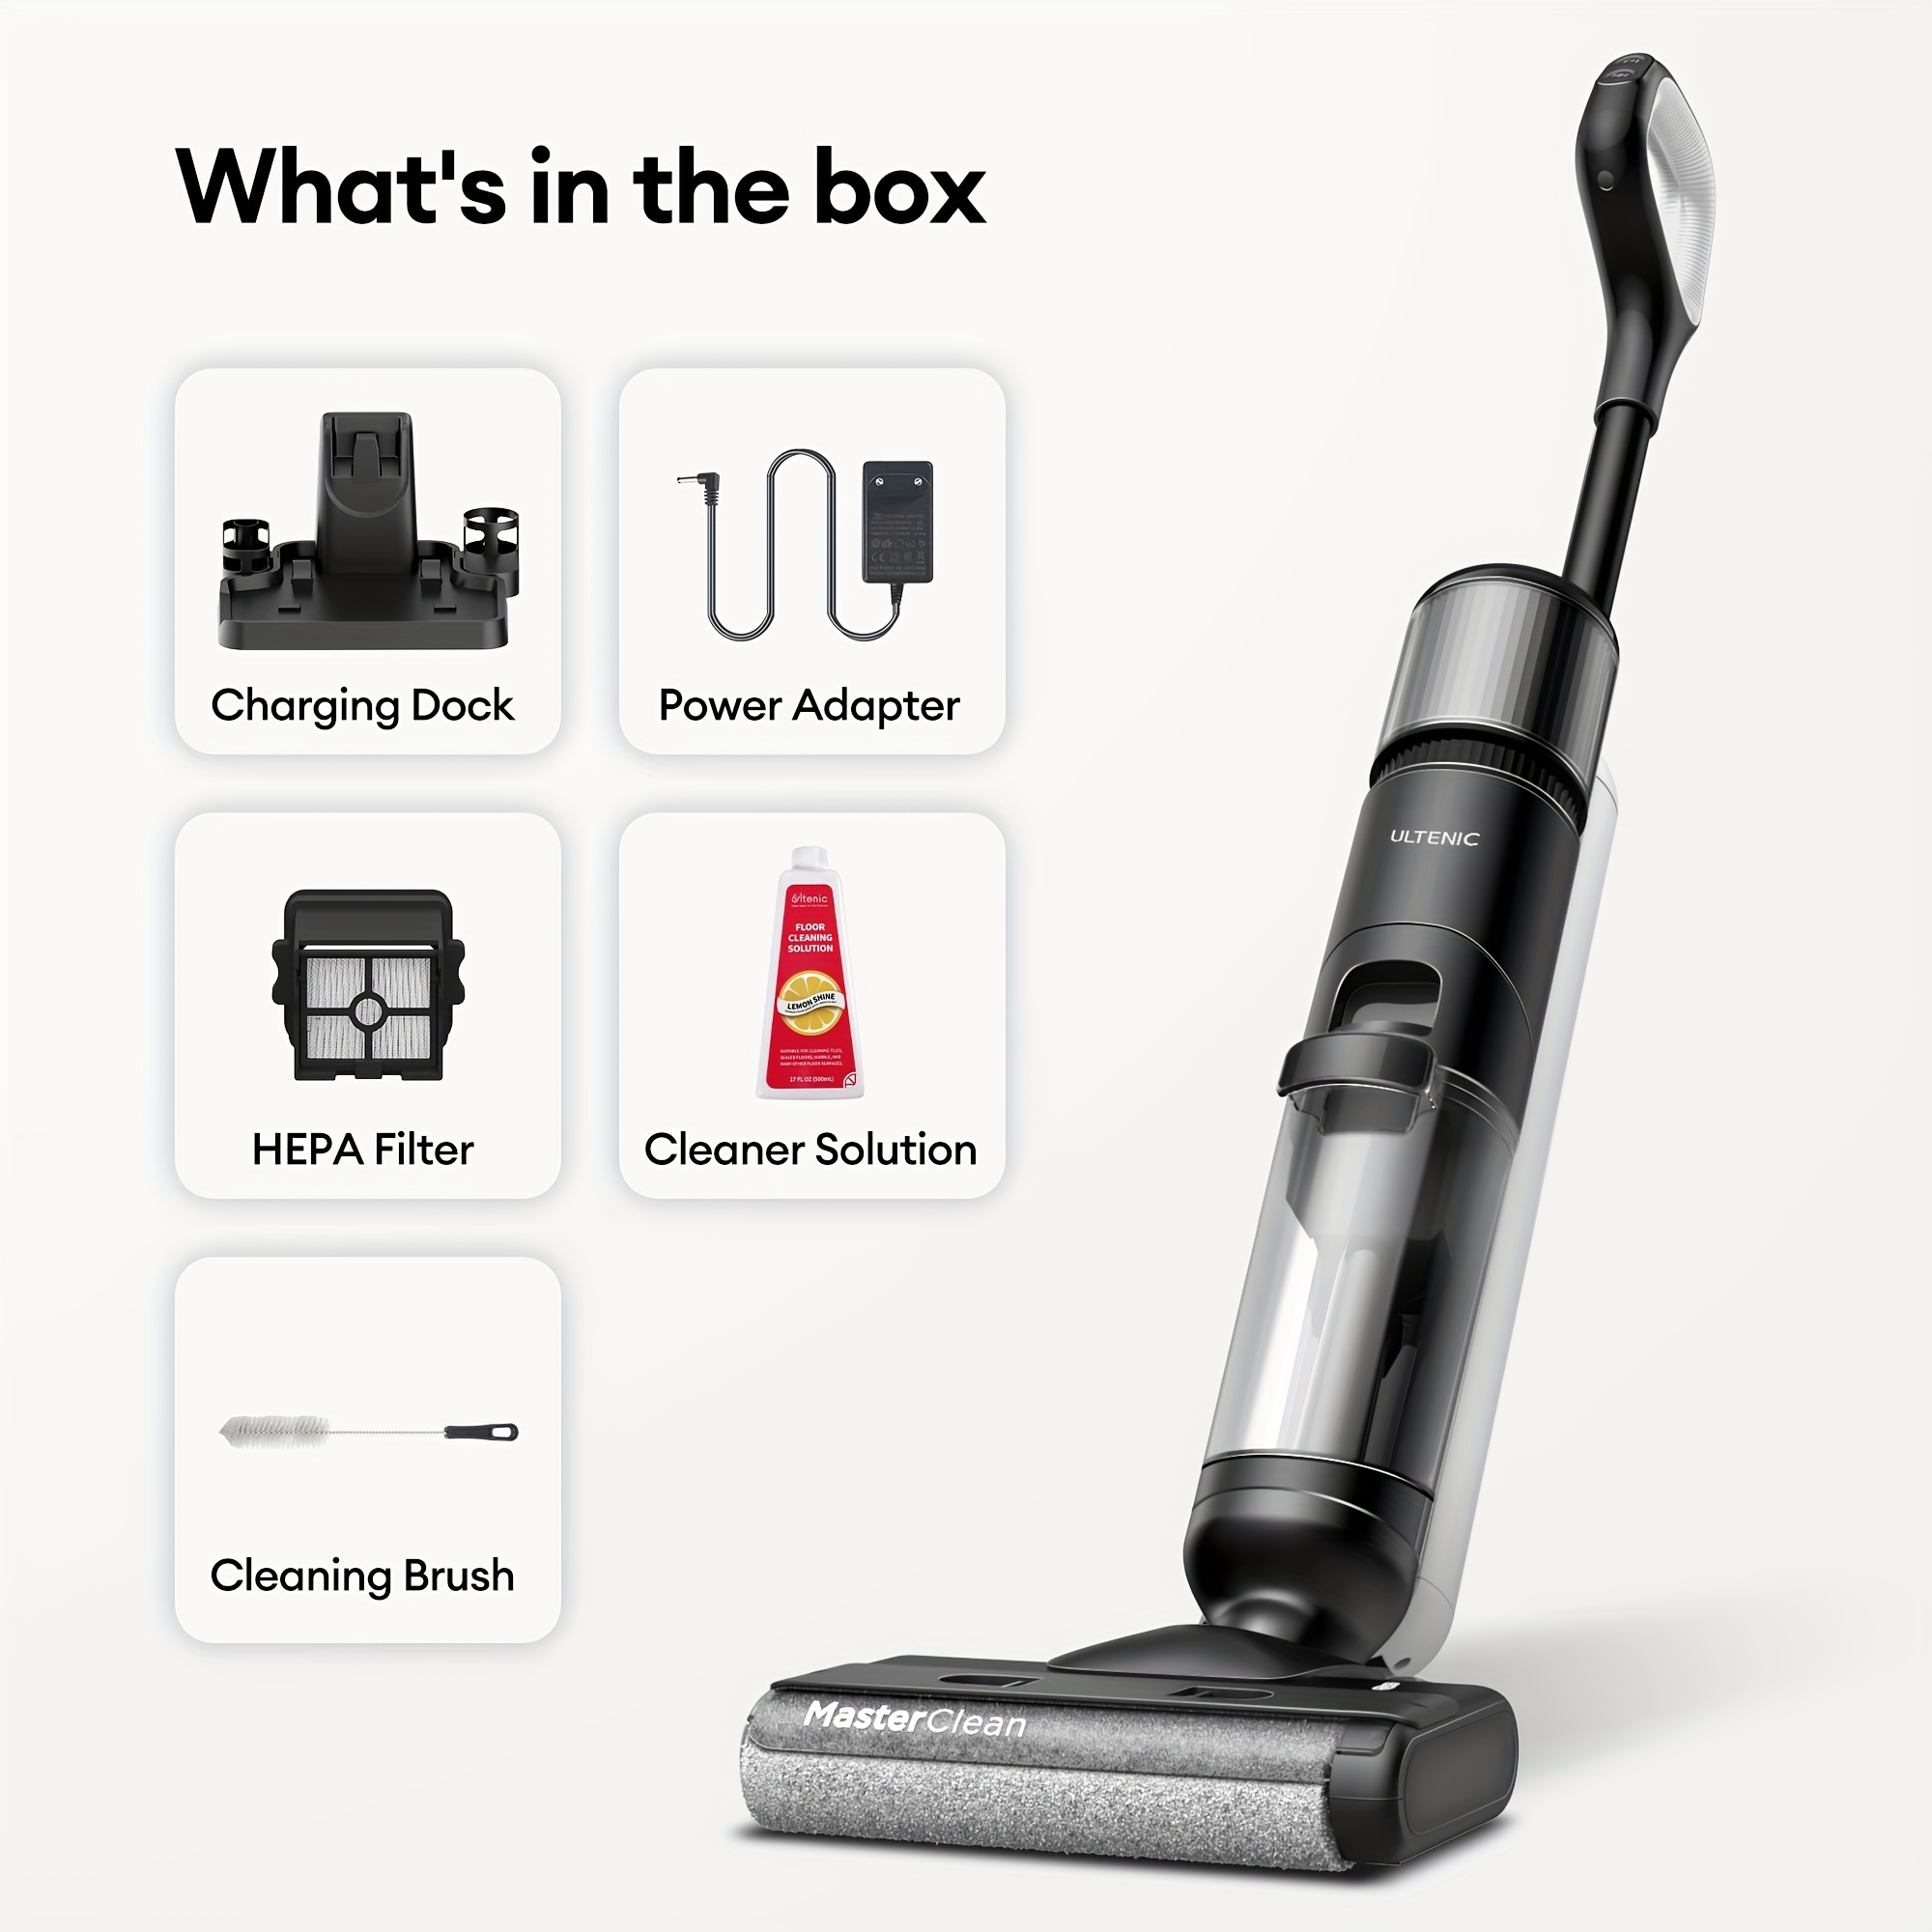 

Cordless Vacuum Mop Combo, Wet Dry Vacuum Cleaner With Self-cleaning, Long Runtime, Smart Mess Detection, Lcd Display, Great For Hard Floors And Sticky Messes Ac1 Elite